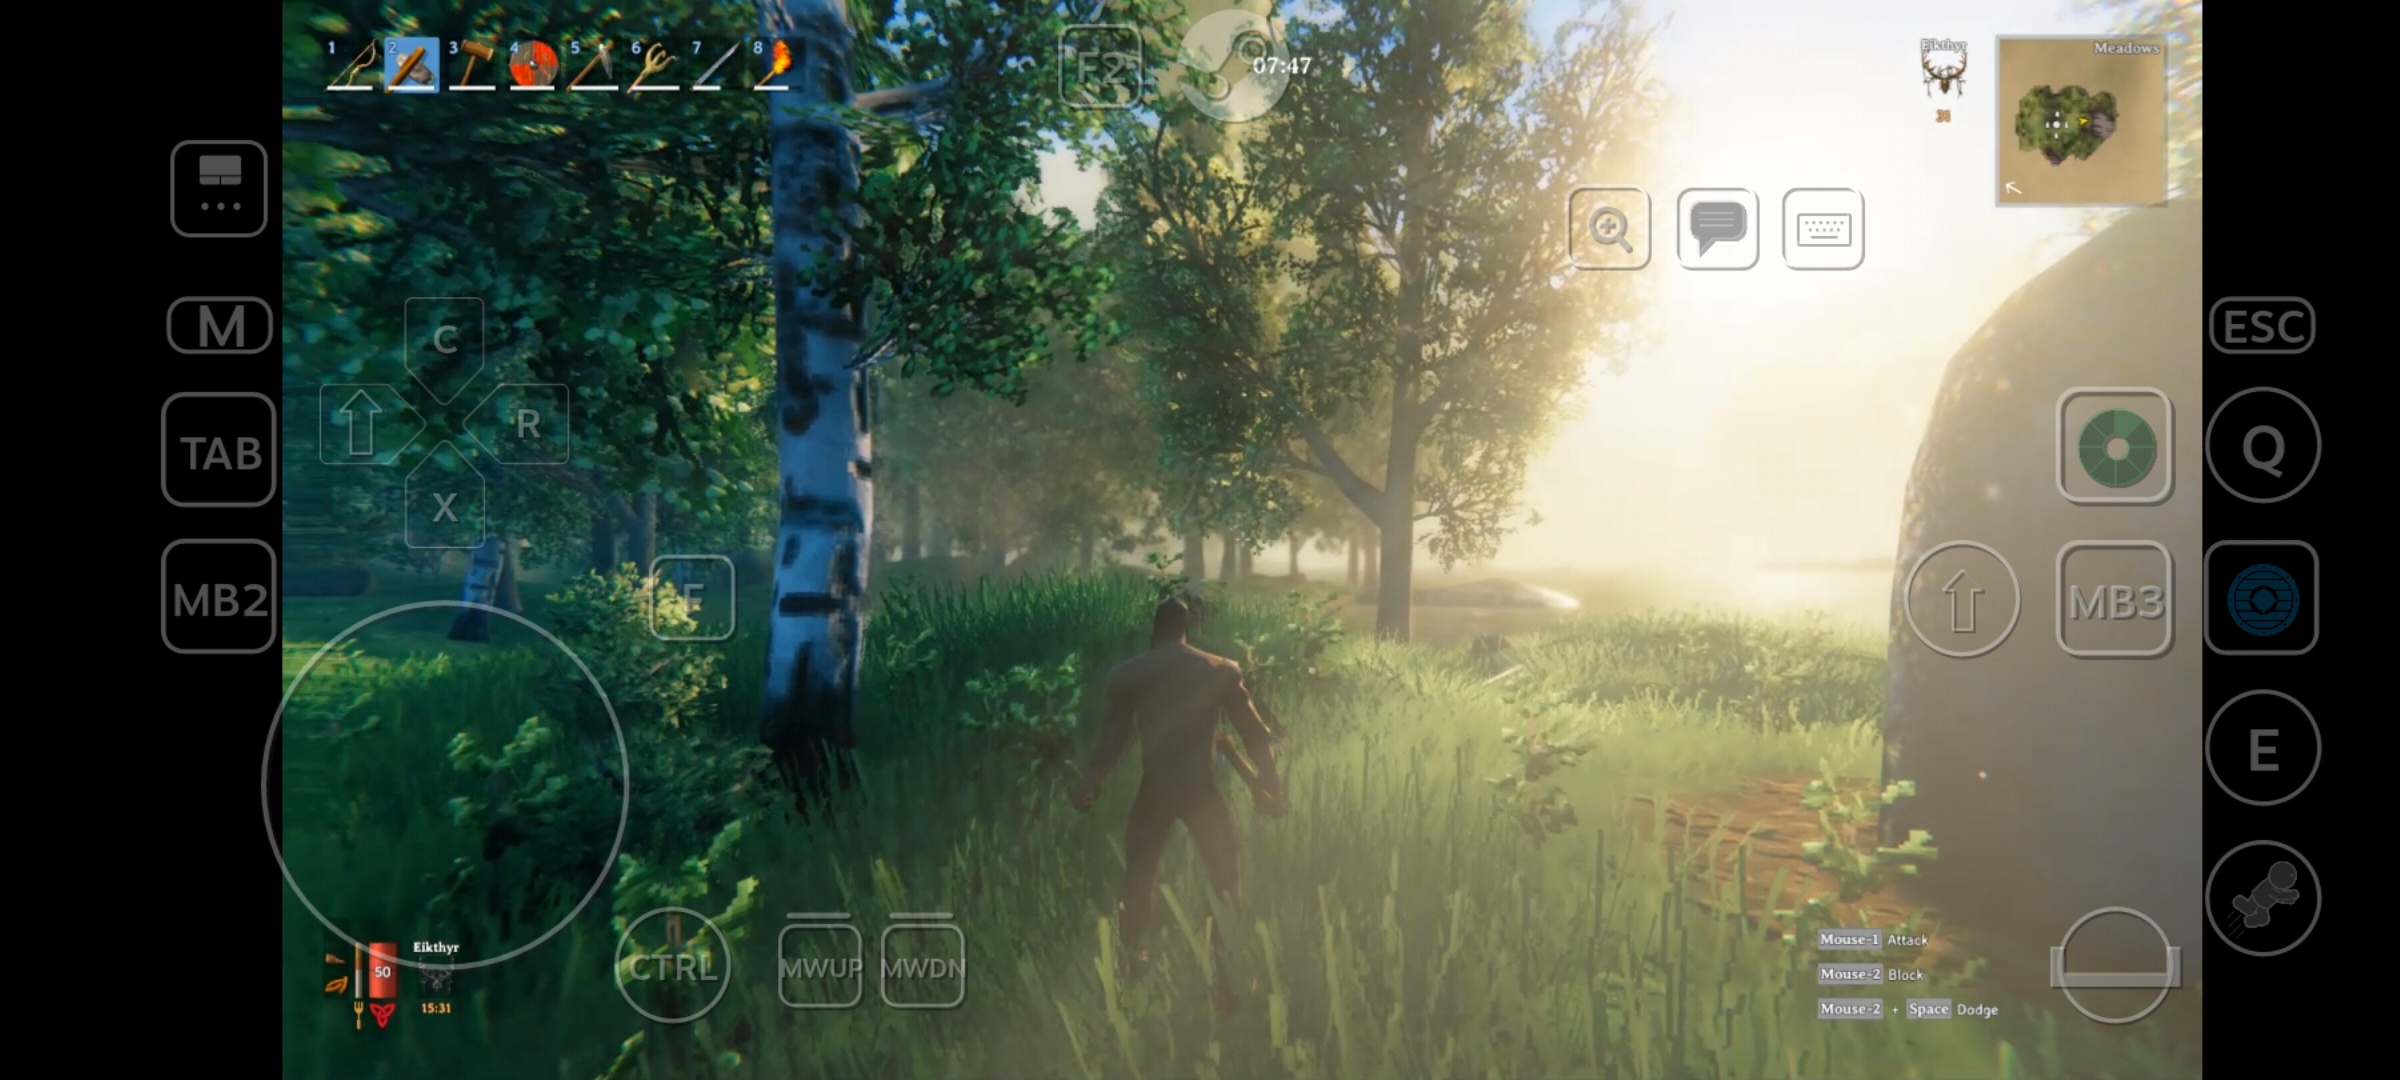 A screenshot of Valheim showing the game on Android using touch controls